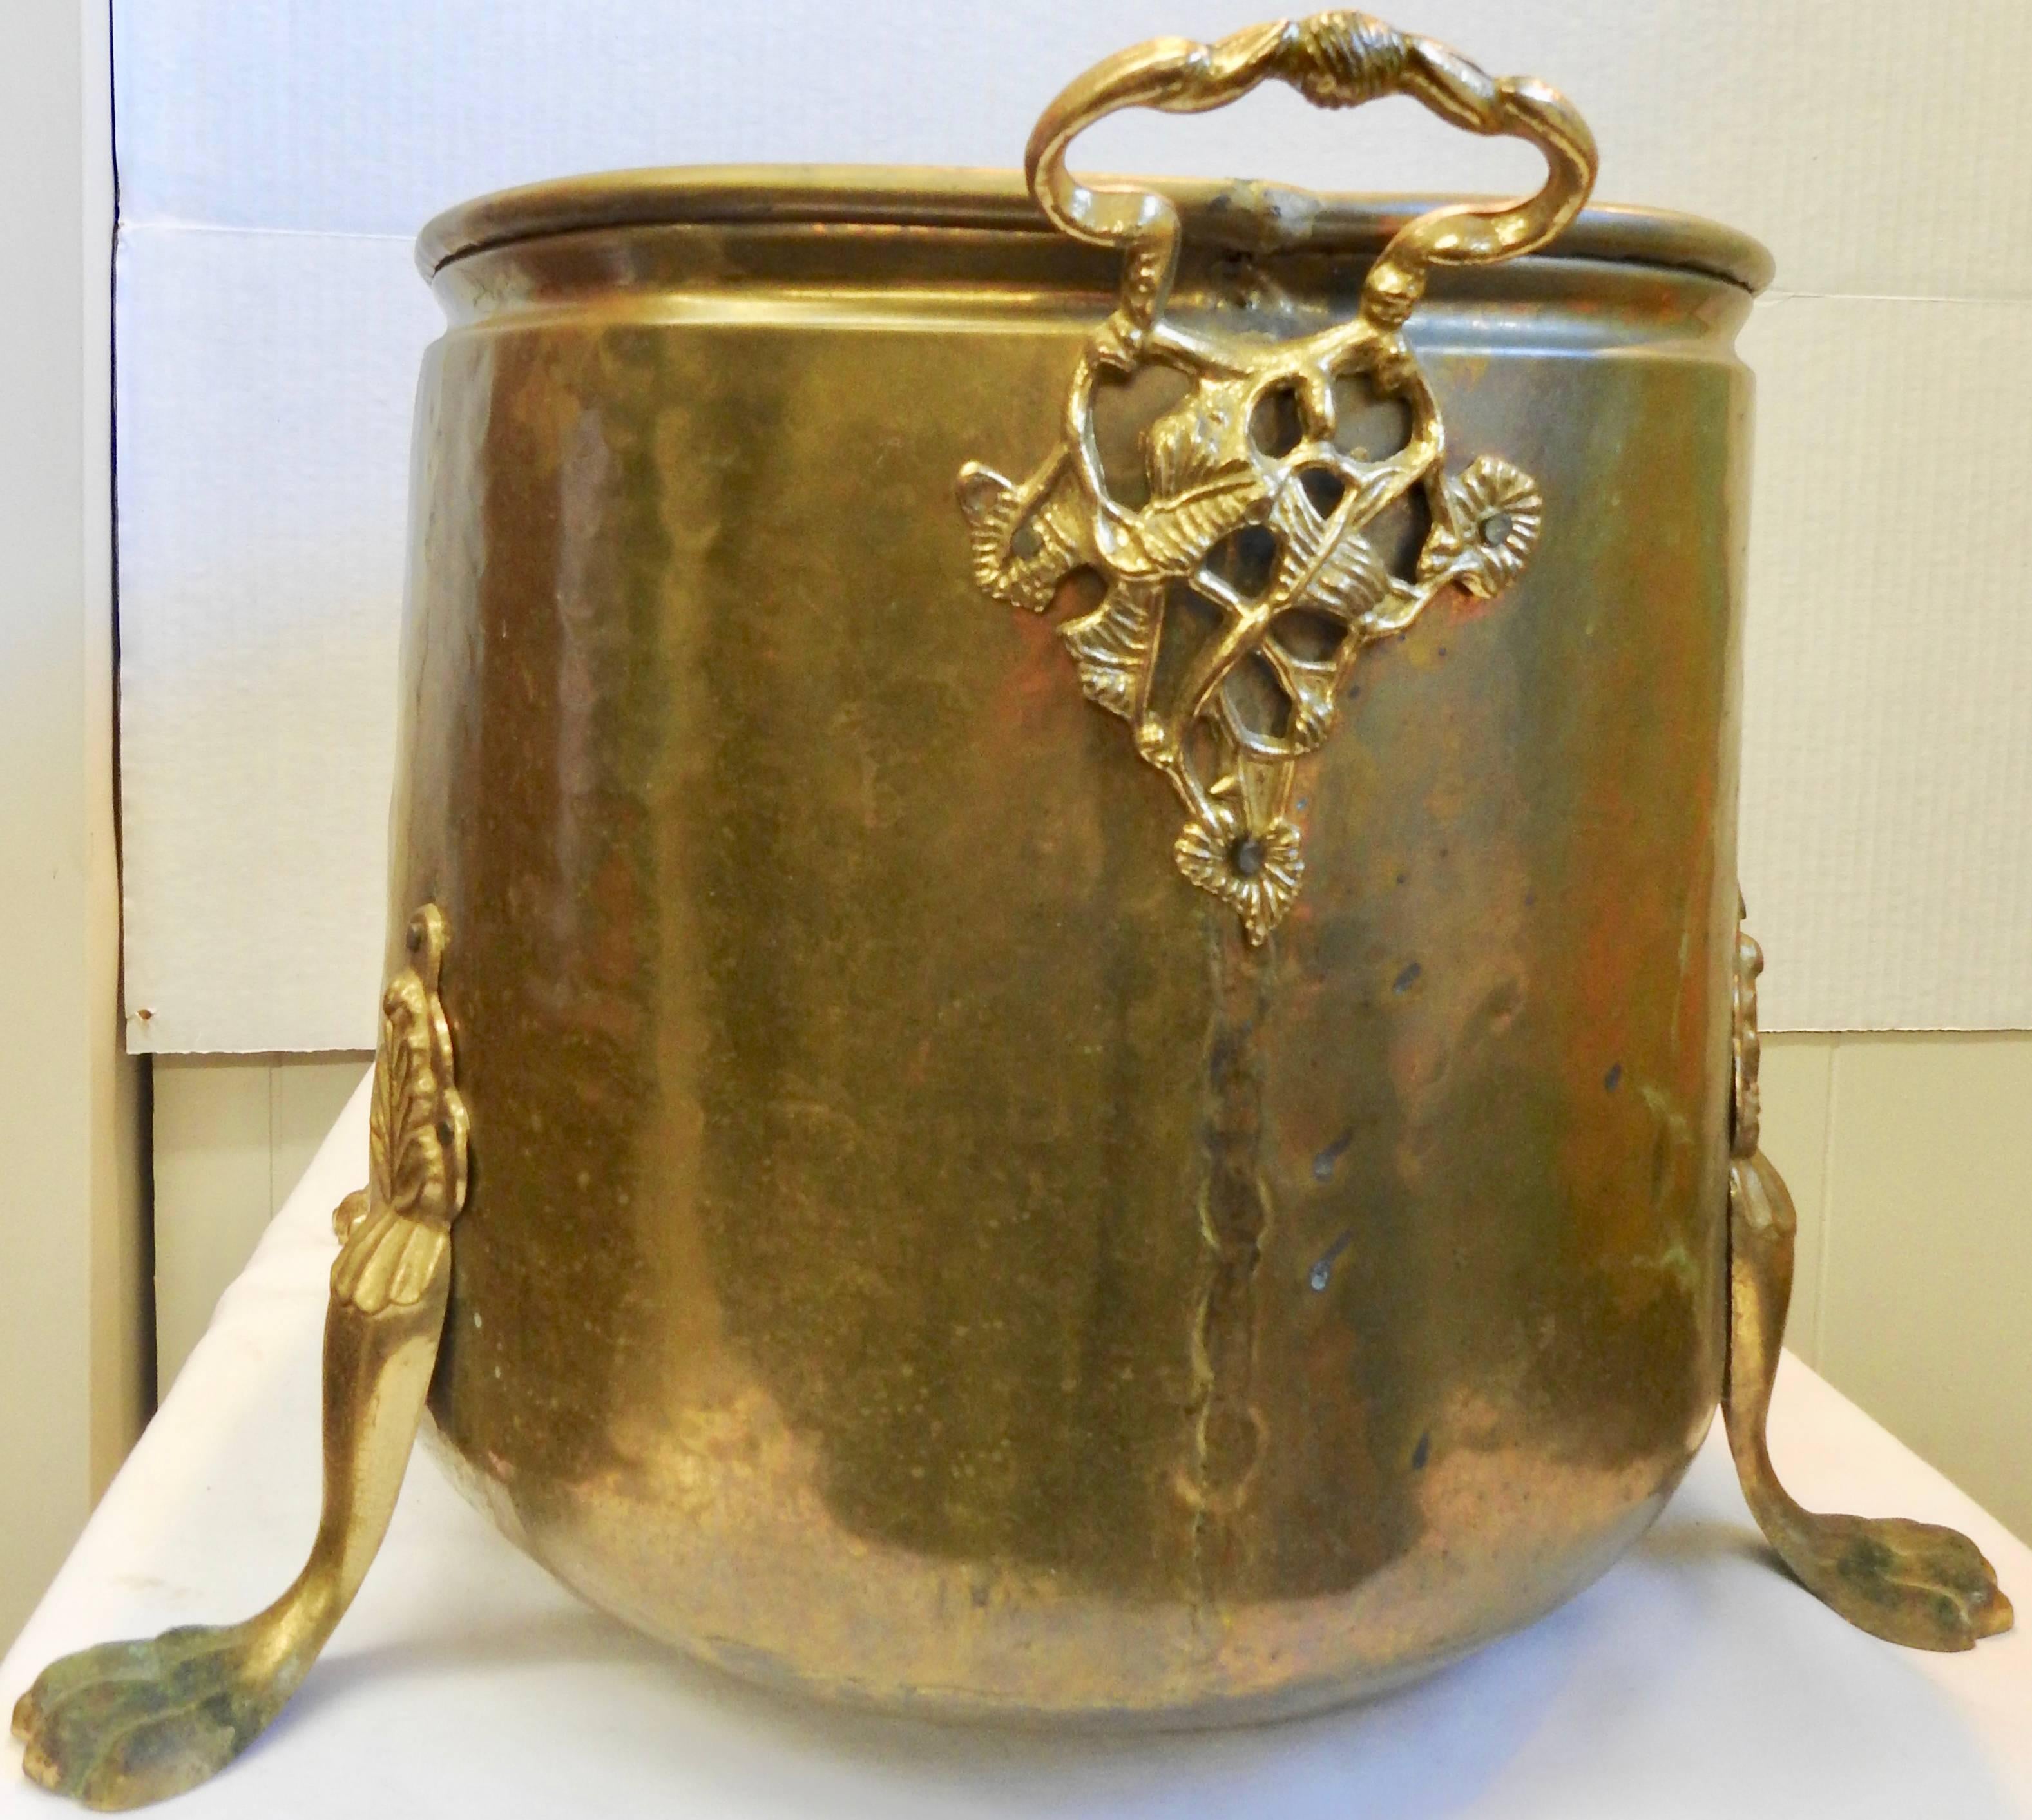 This midcentury brass fire bucket has been beautifully crafted. The body of the bucket is lightly hammered and it sits atop cast footed legs. The cast brass pair of handles has ornate detailing.